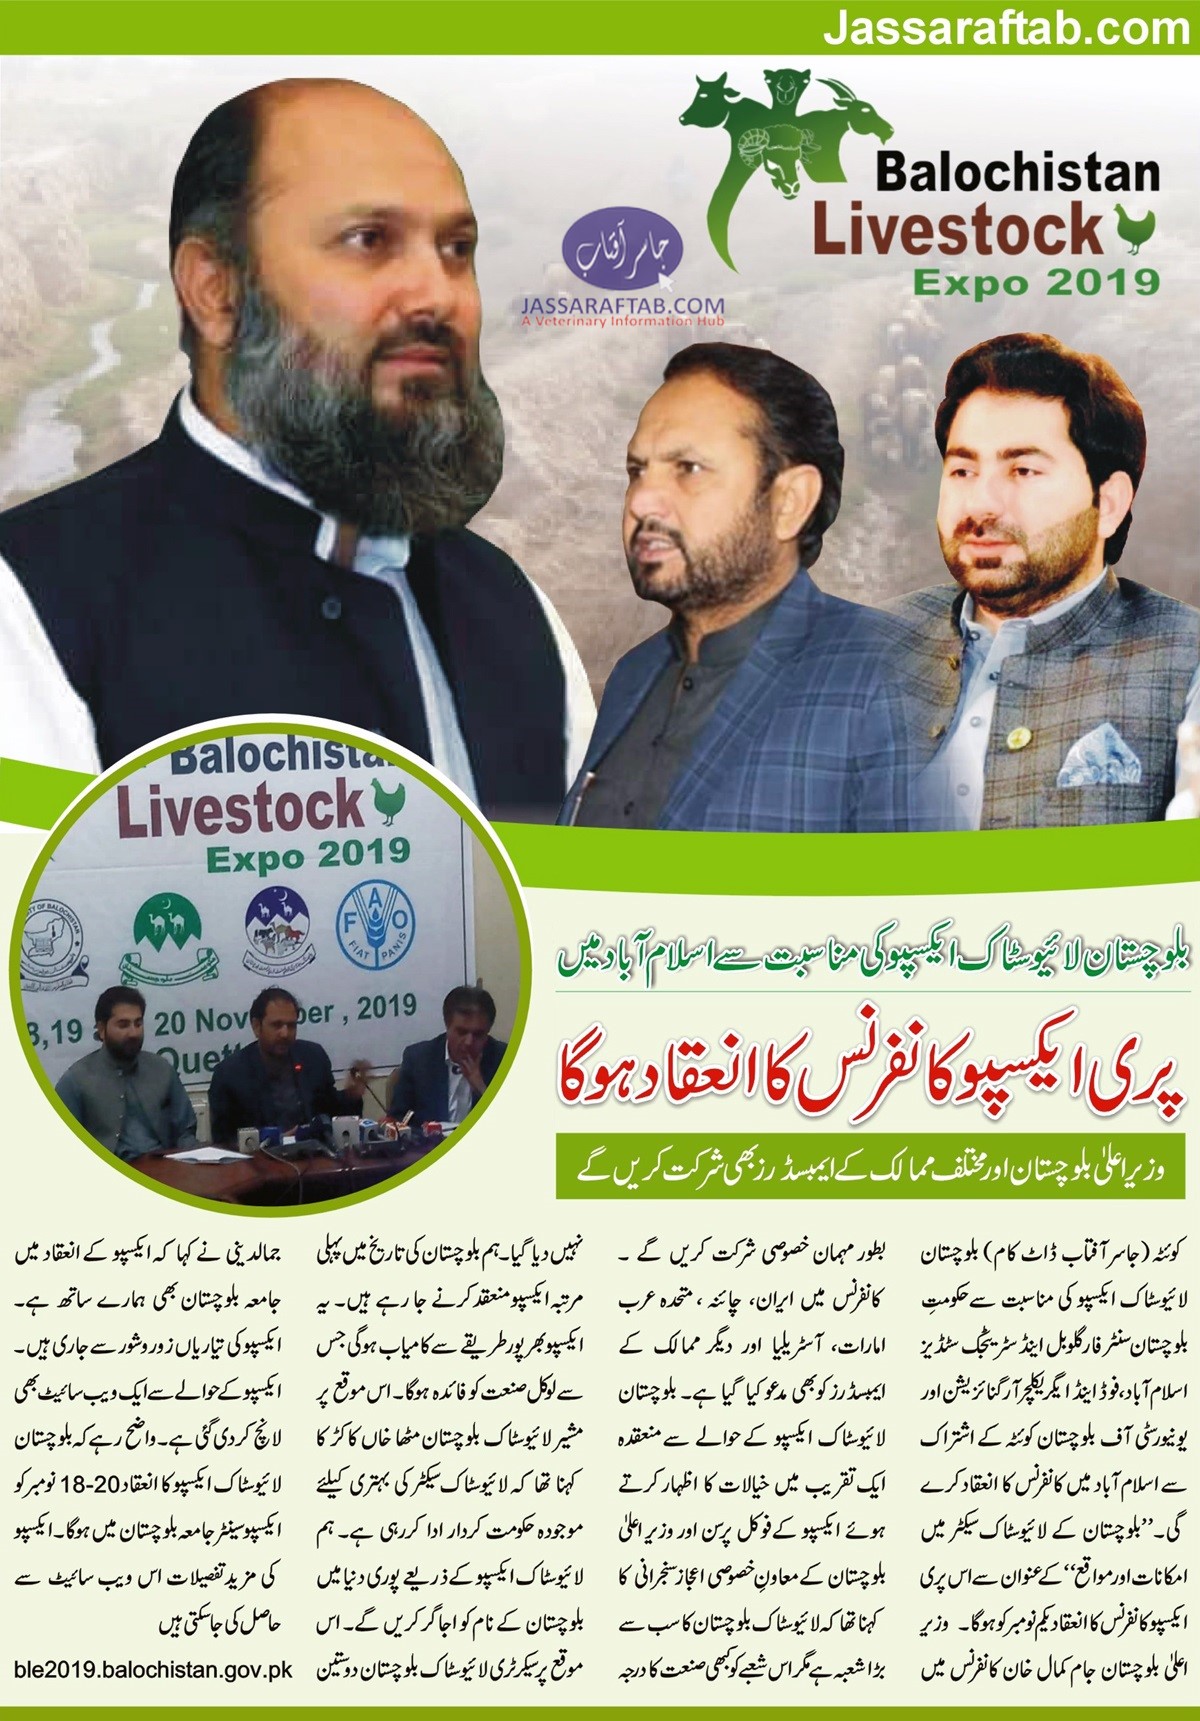 Balochistan Pre Expo Conference to be held at Islamabad regarding Balochistan Livestock Expo